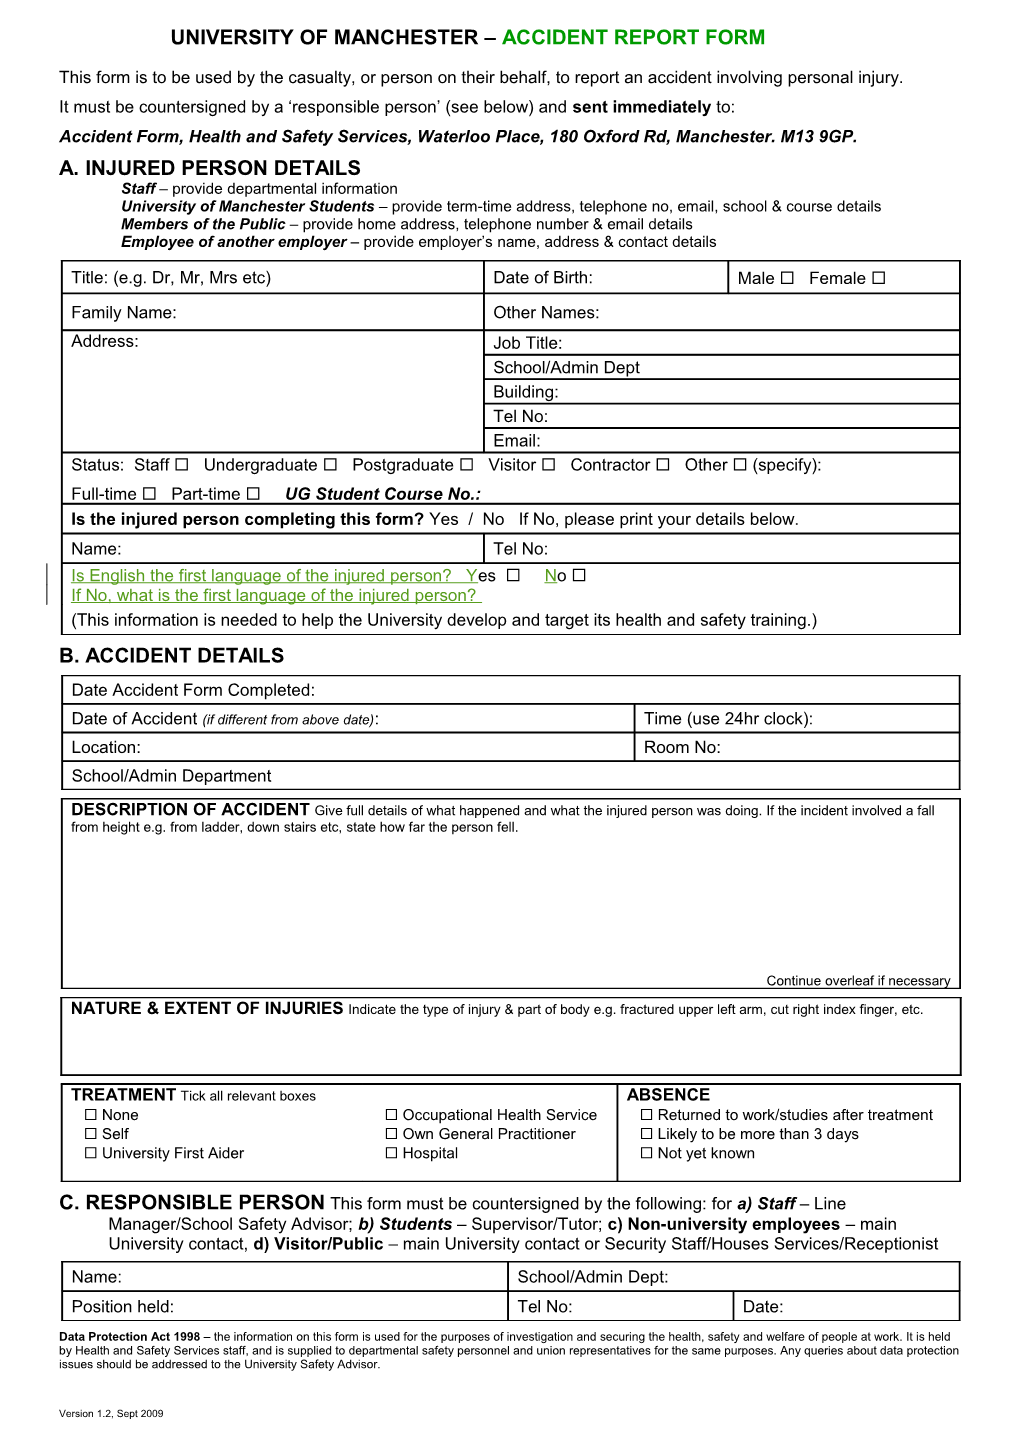 University of Manchester Accident Report Form